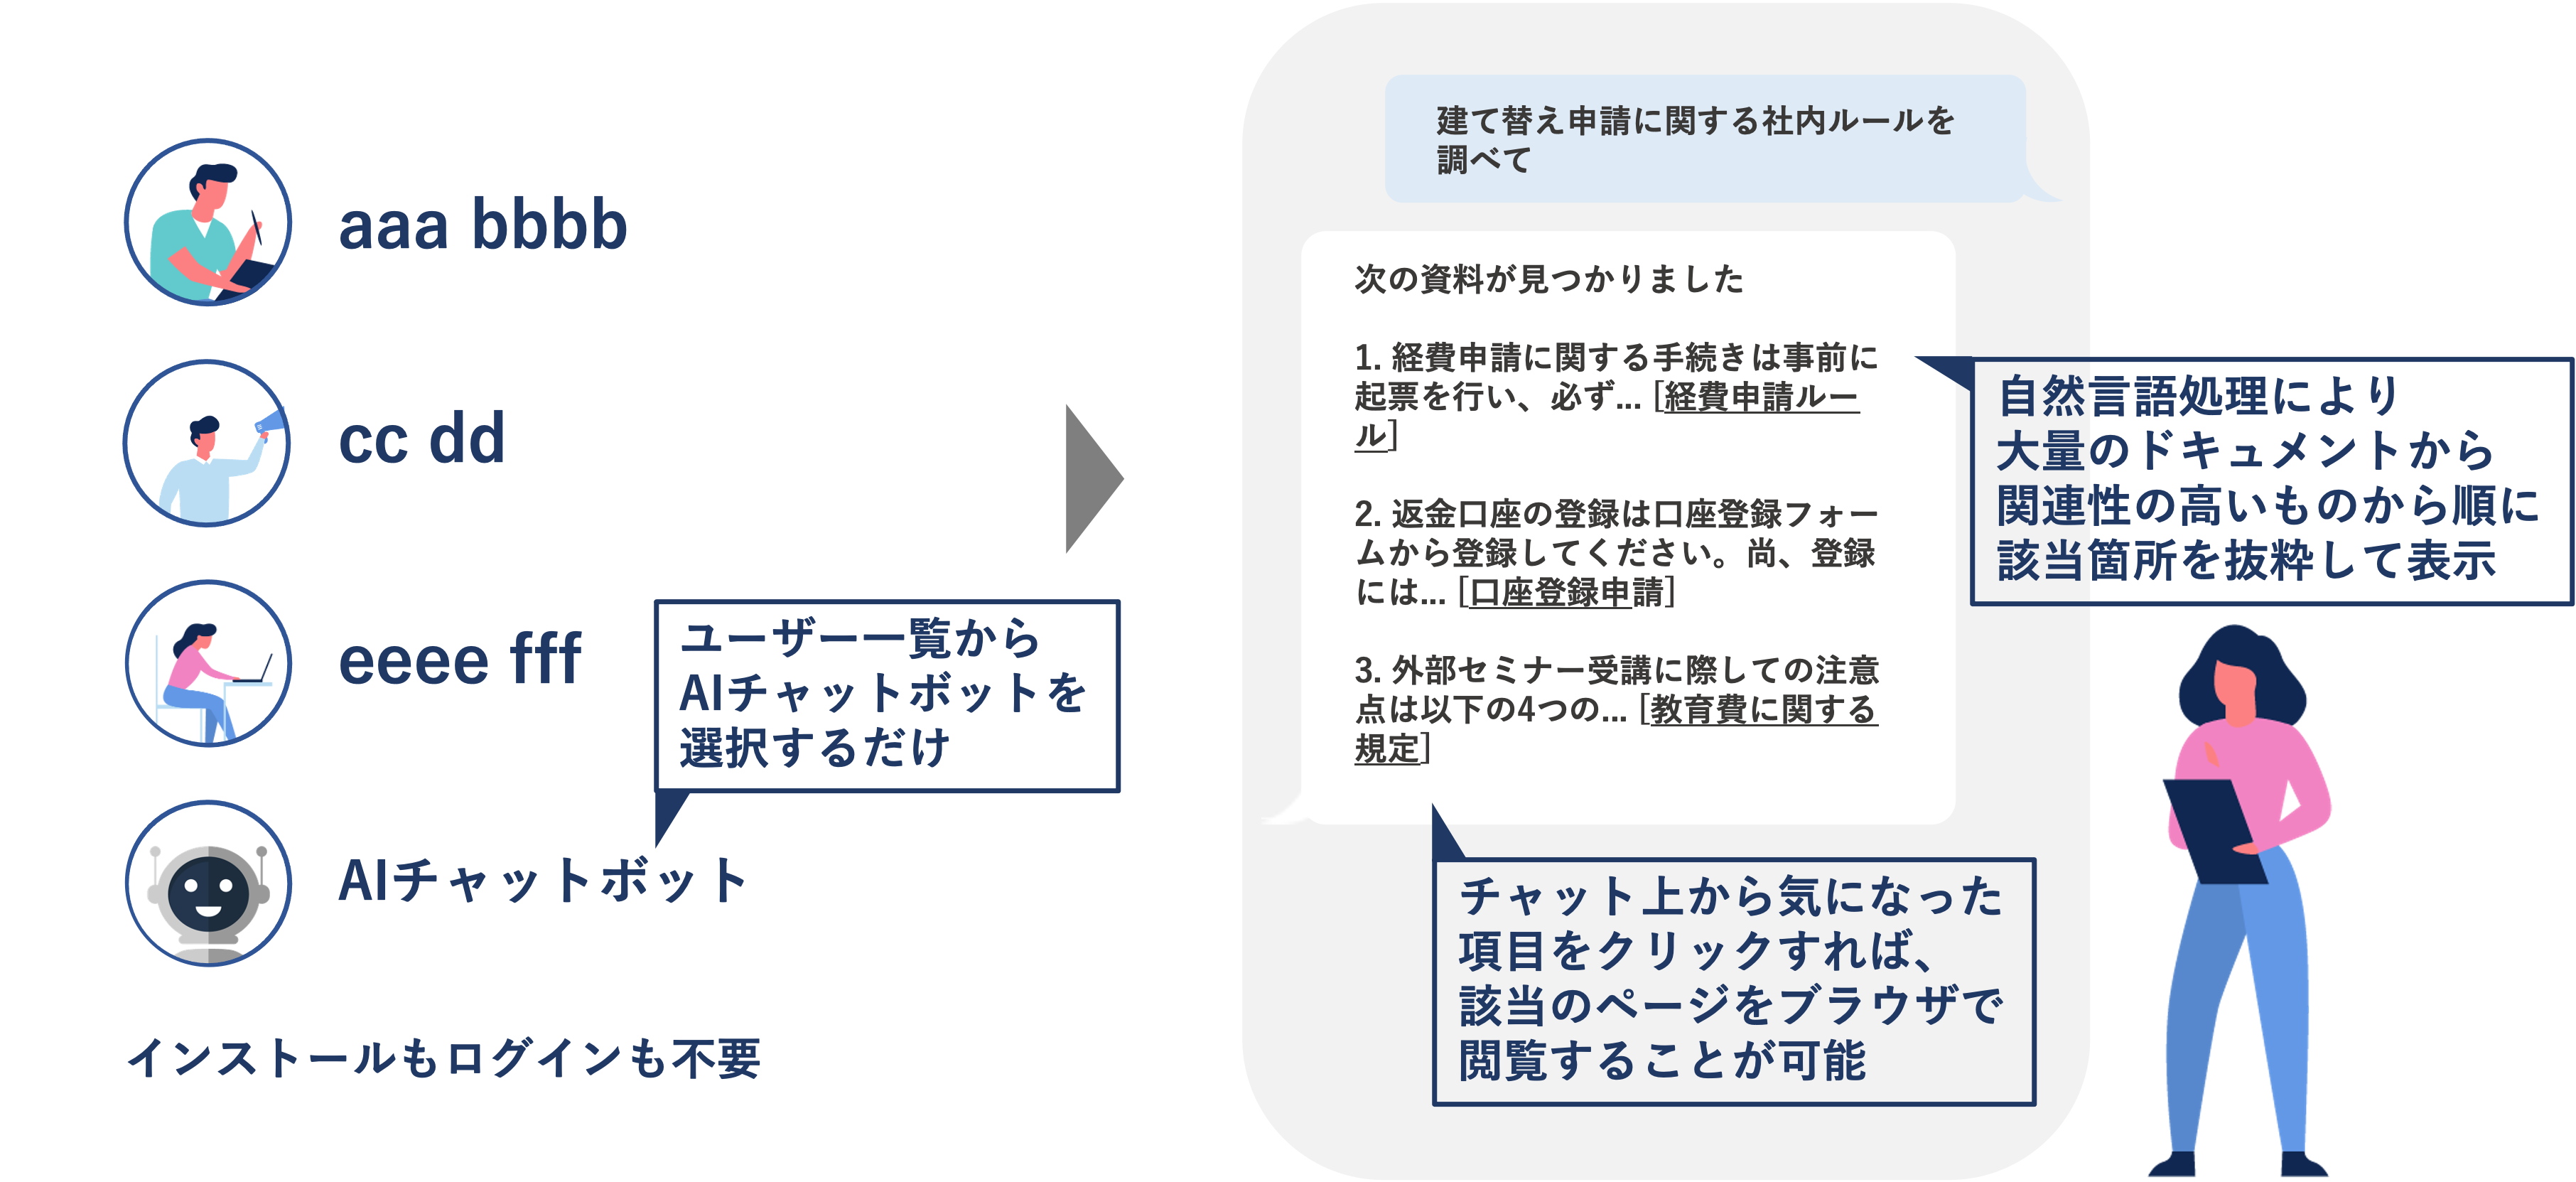 https://isid-ai.jp/assets/images/report/report4_chatbot_ai_UI.png